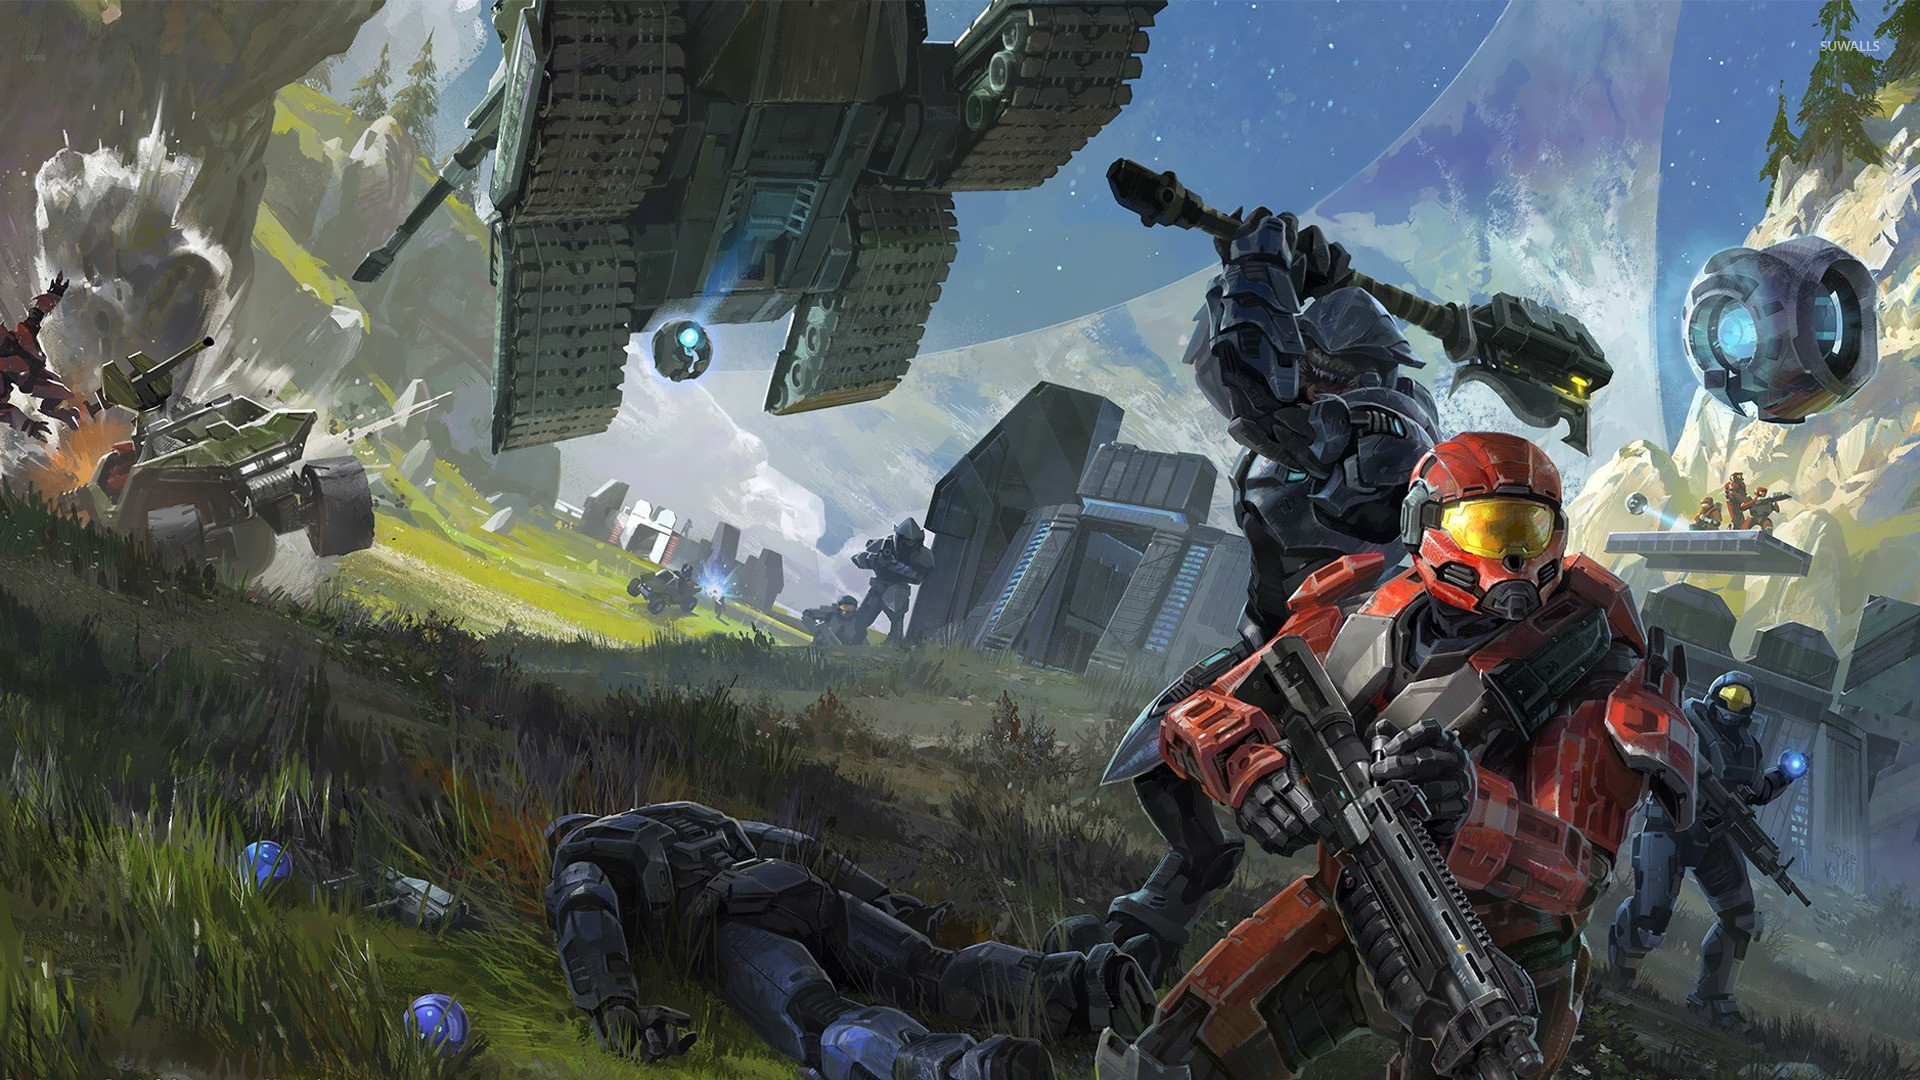 1920x1080 Halo Reach Backgrounds